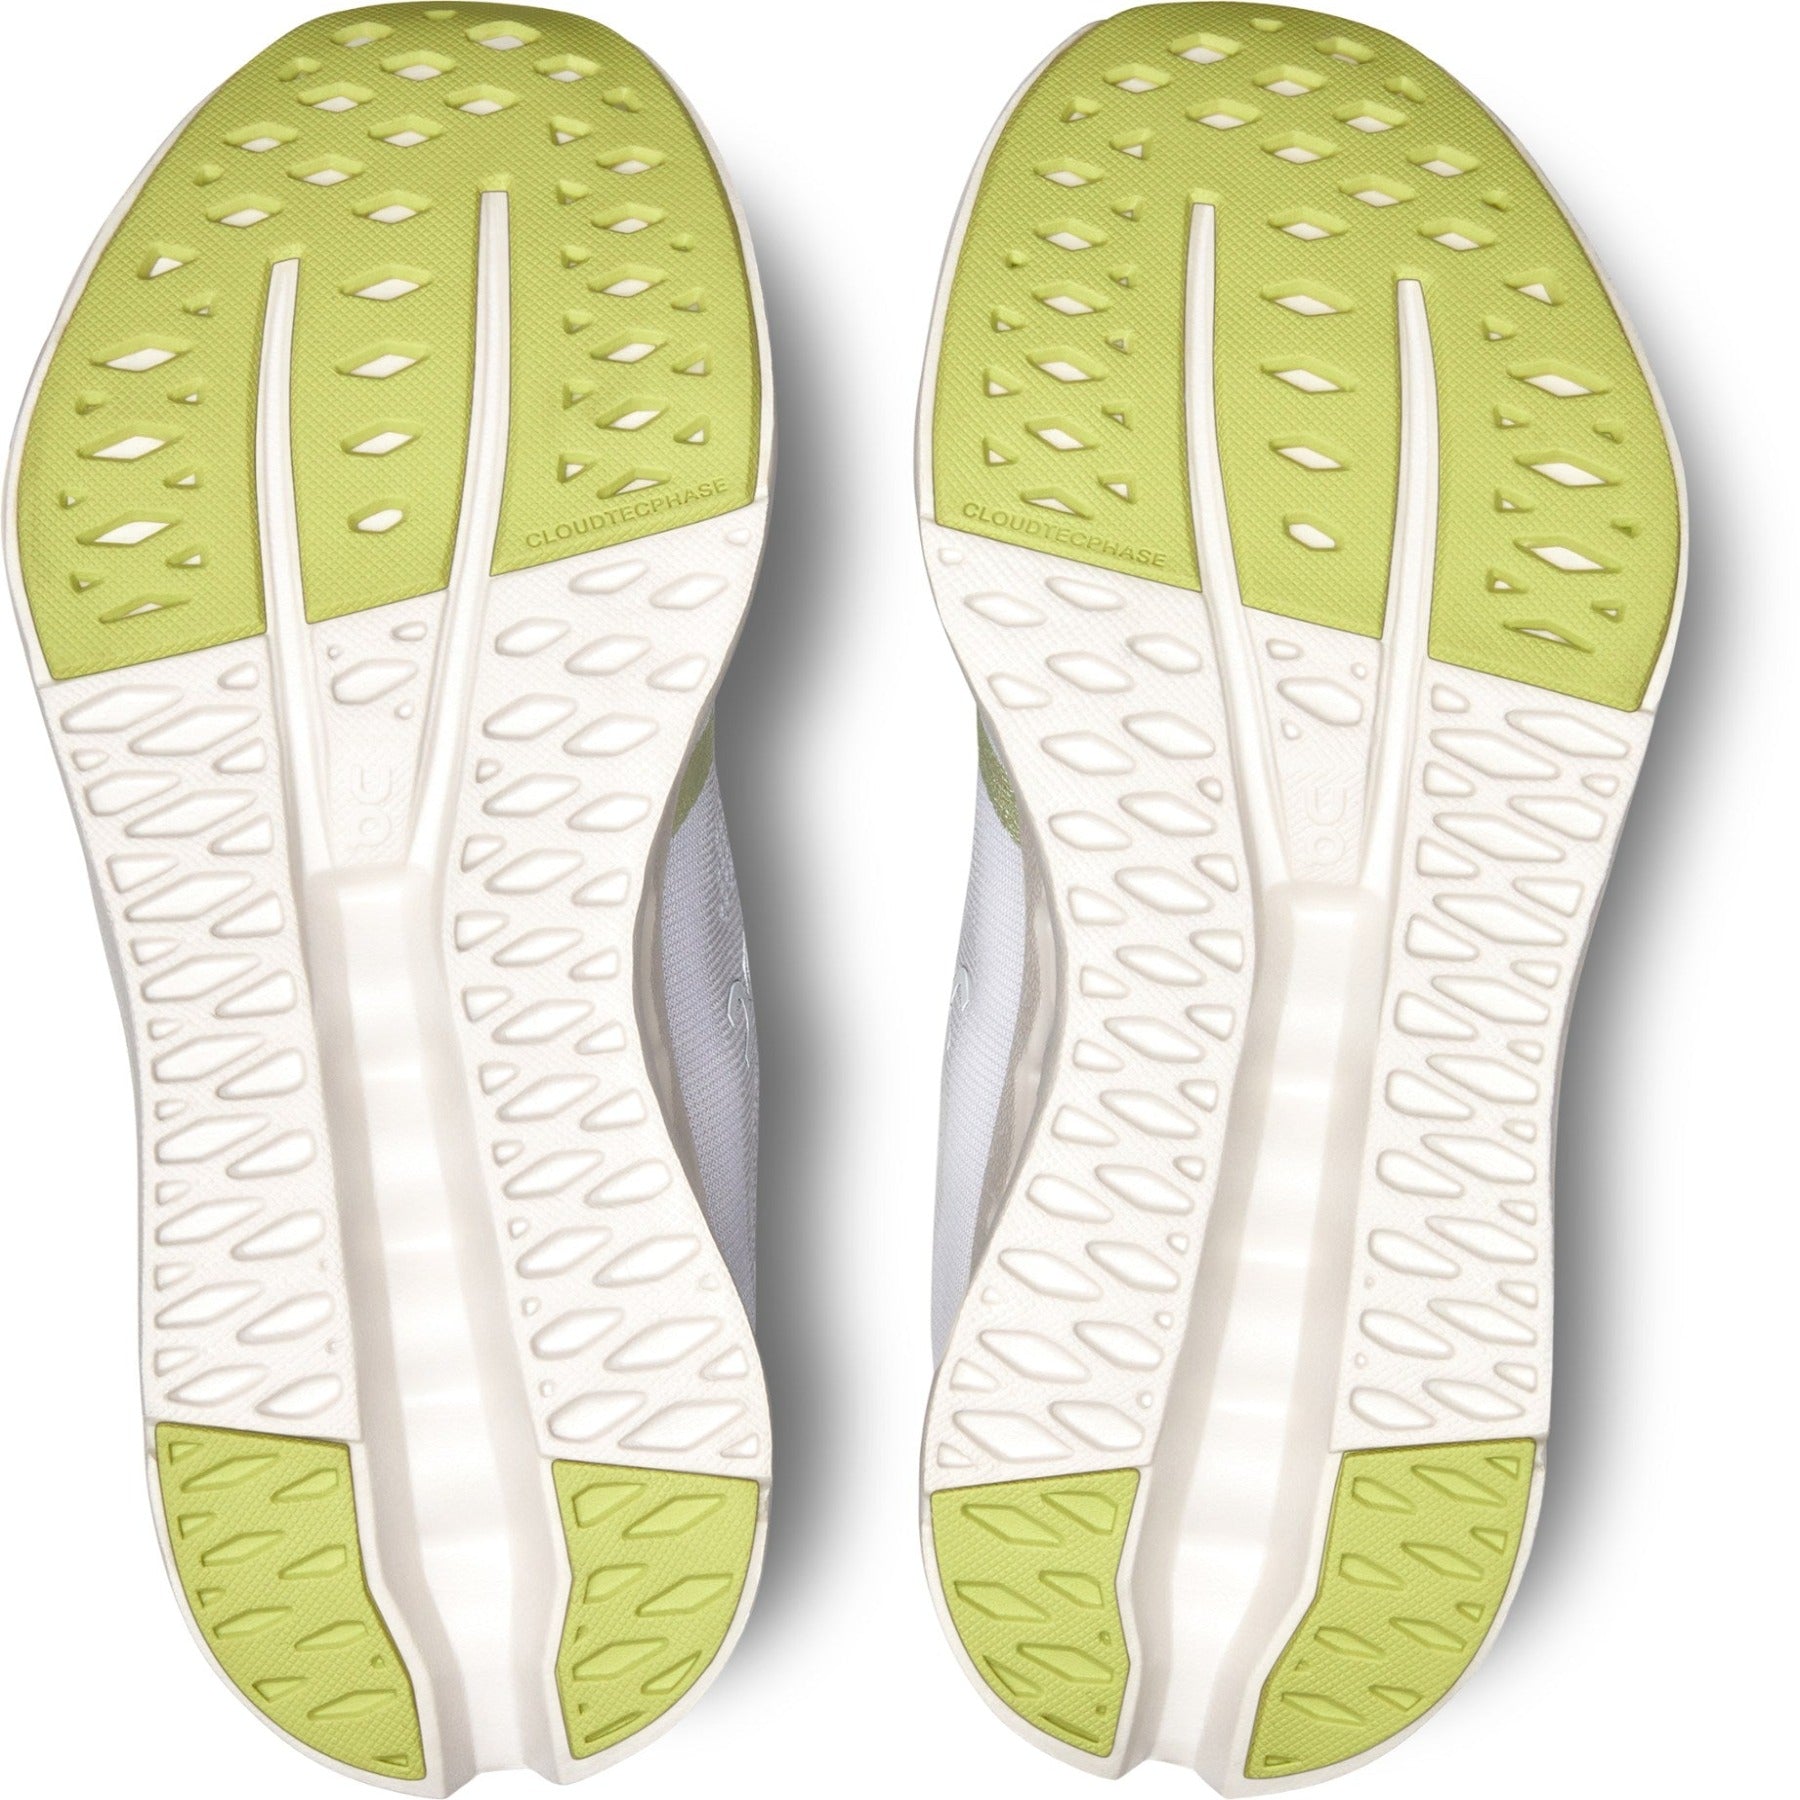 Bottom (outer sole) view of the Women's Cloudsurfer by ON in the color White/Sand